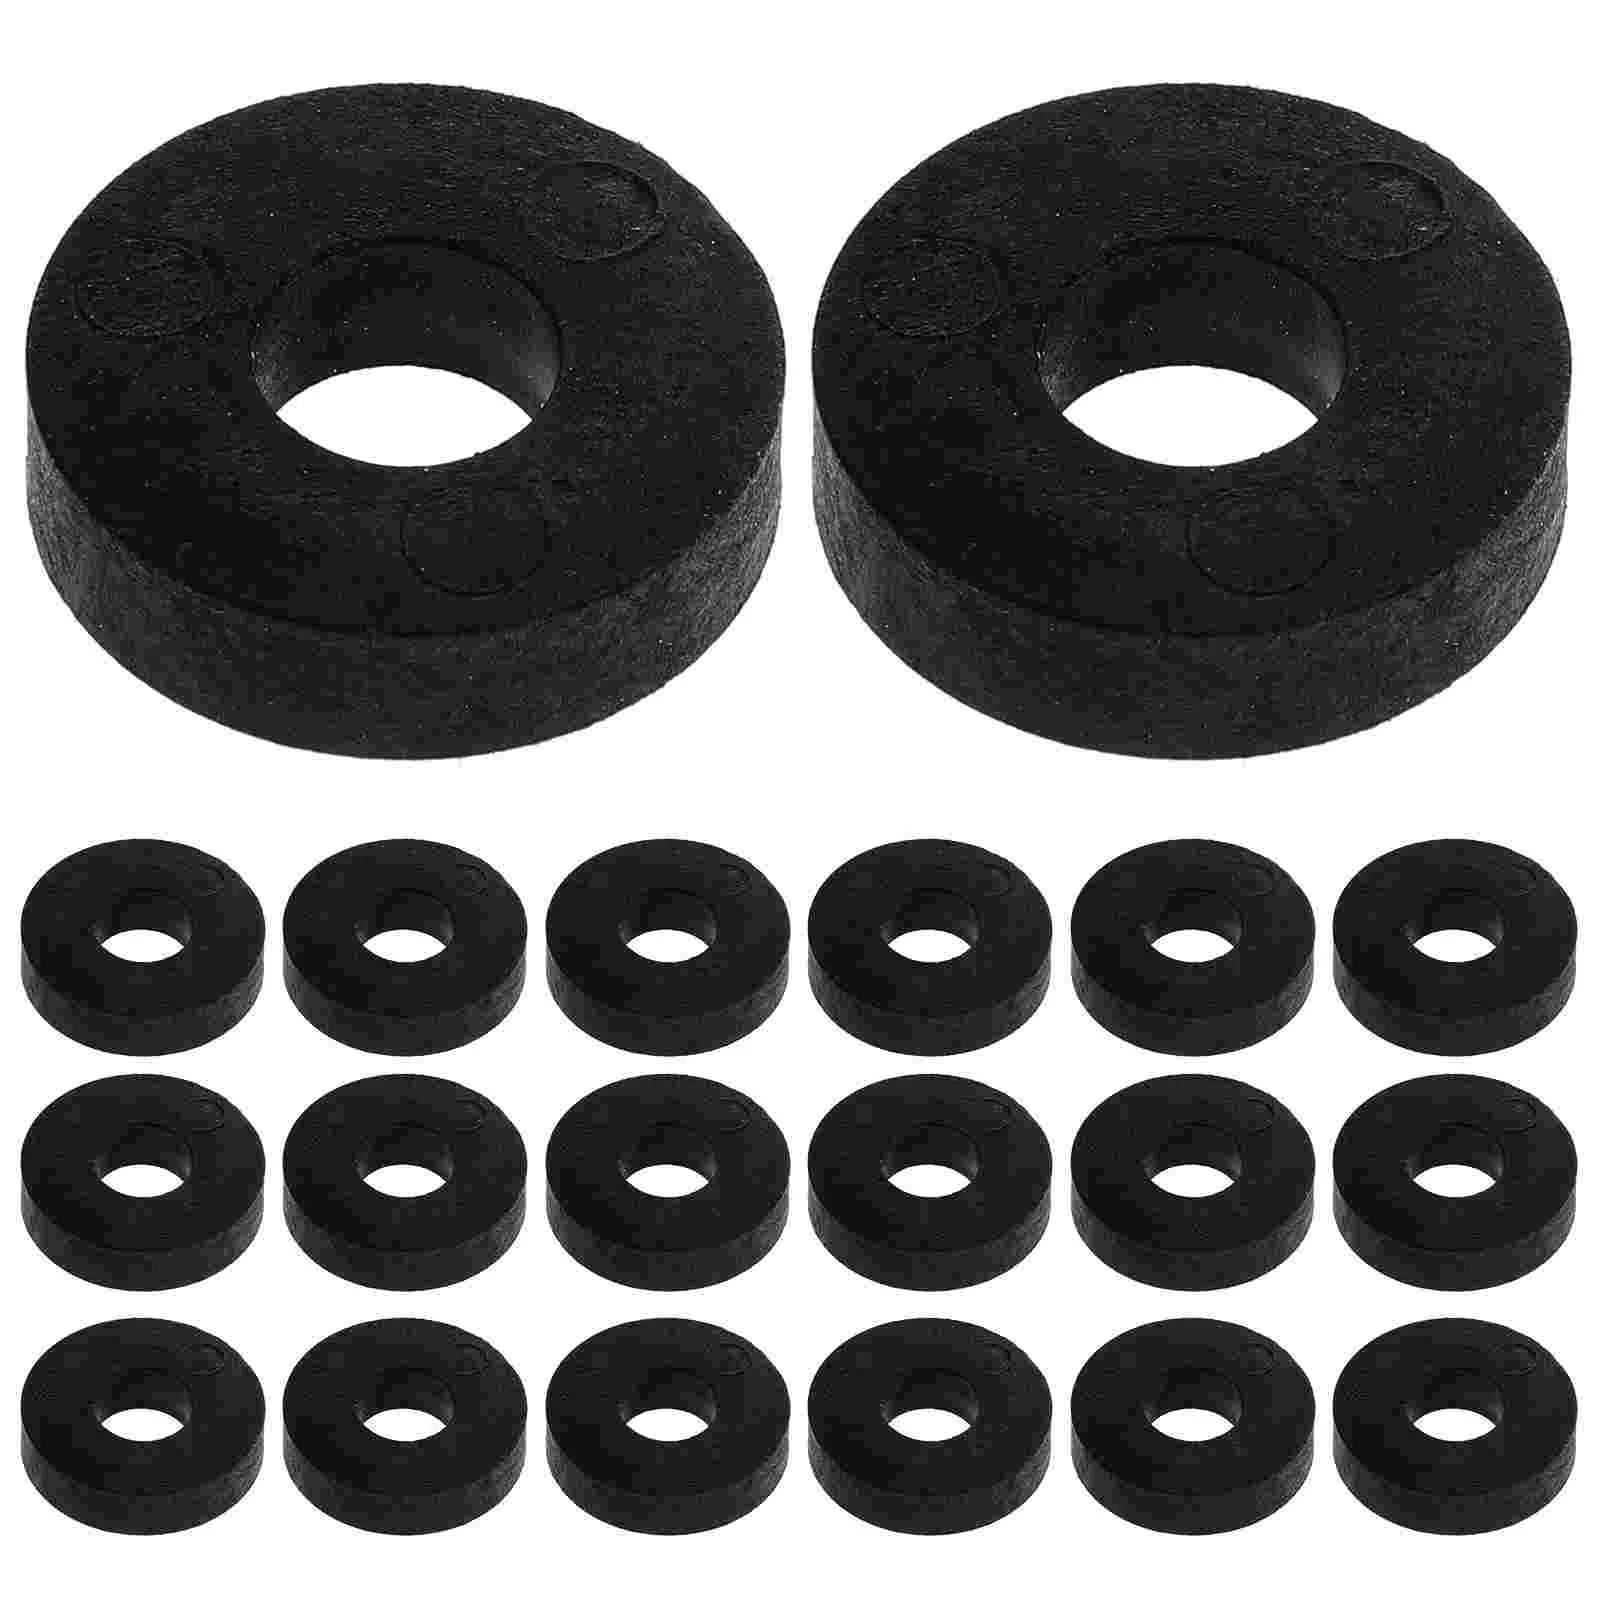 

25 Pcs Thickness Rubber Washer Abrasion Resistant Washers Water Spigot Mechanical Spacers Bolts Outer Ring Hose Flat